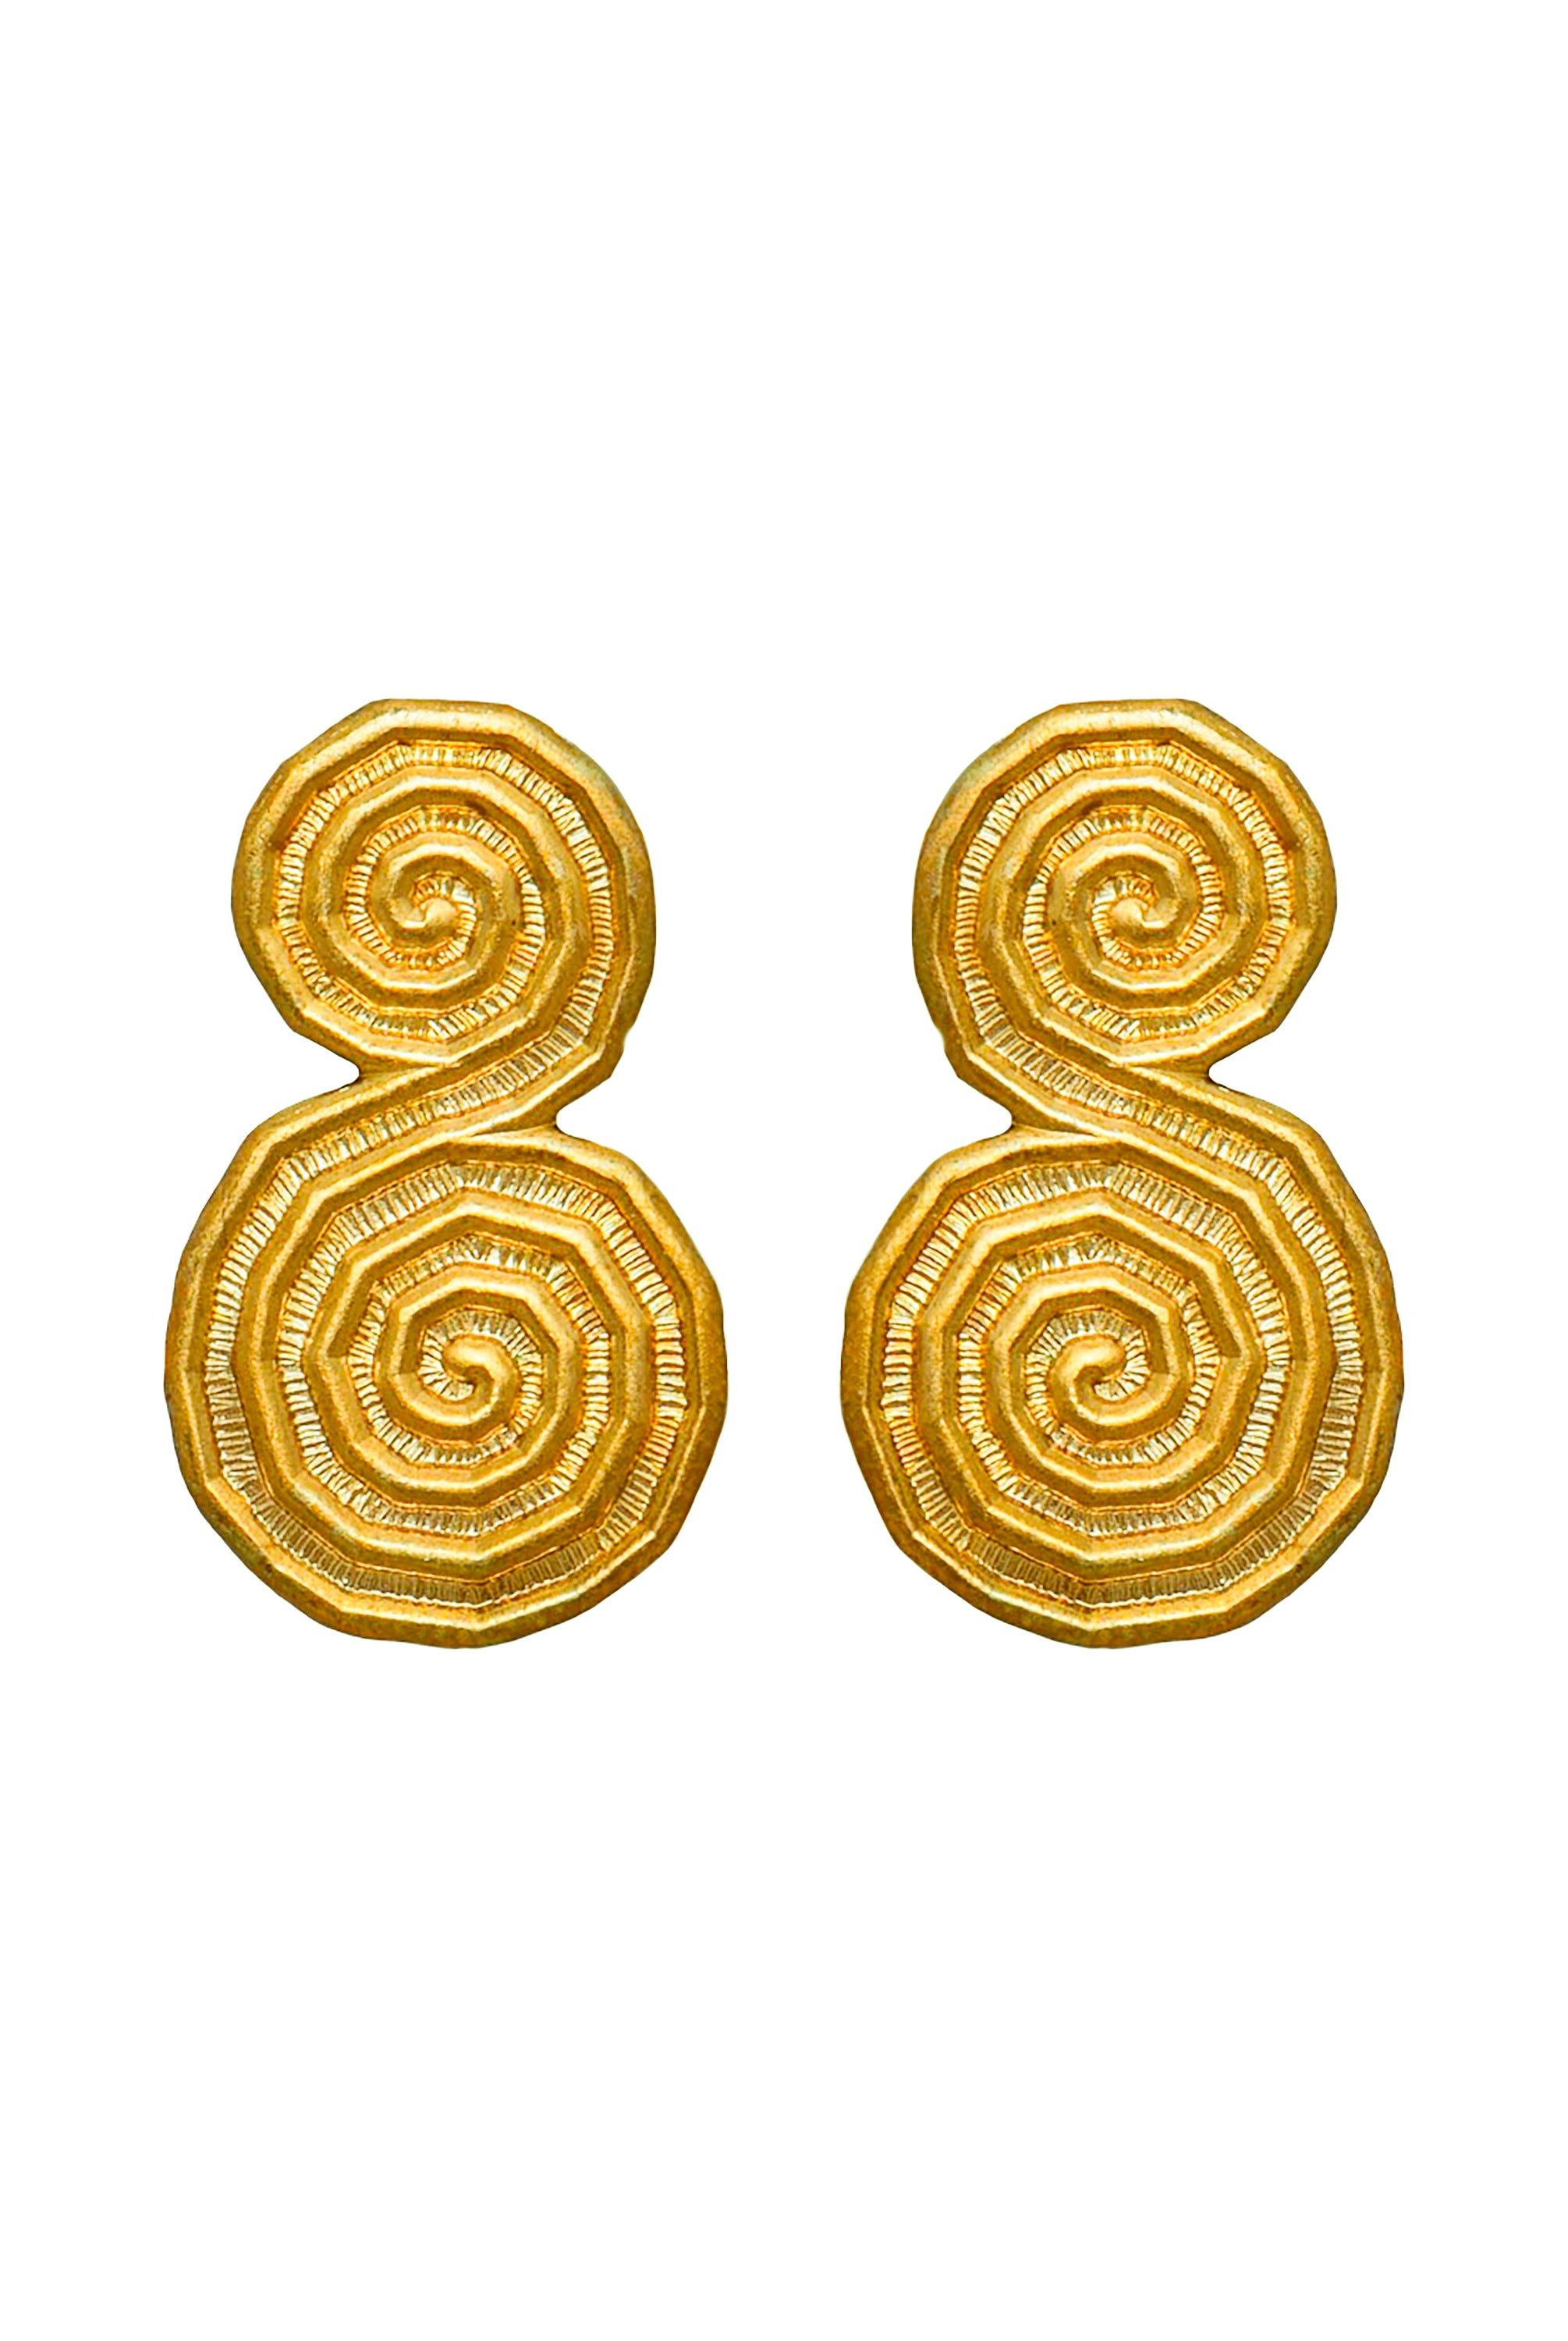 Shala Earrings-Earrings-Vixen Collection, Day Spa and Women's Boutique Located in Seattle, Washington